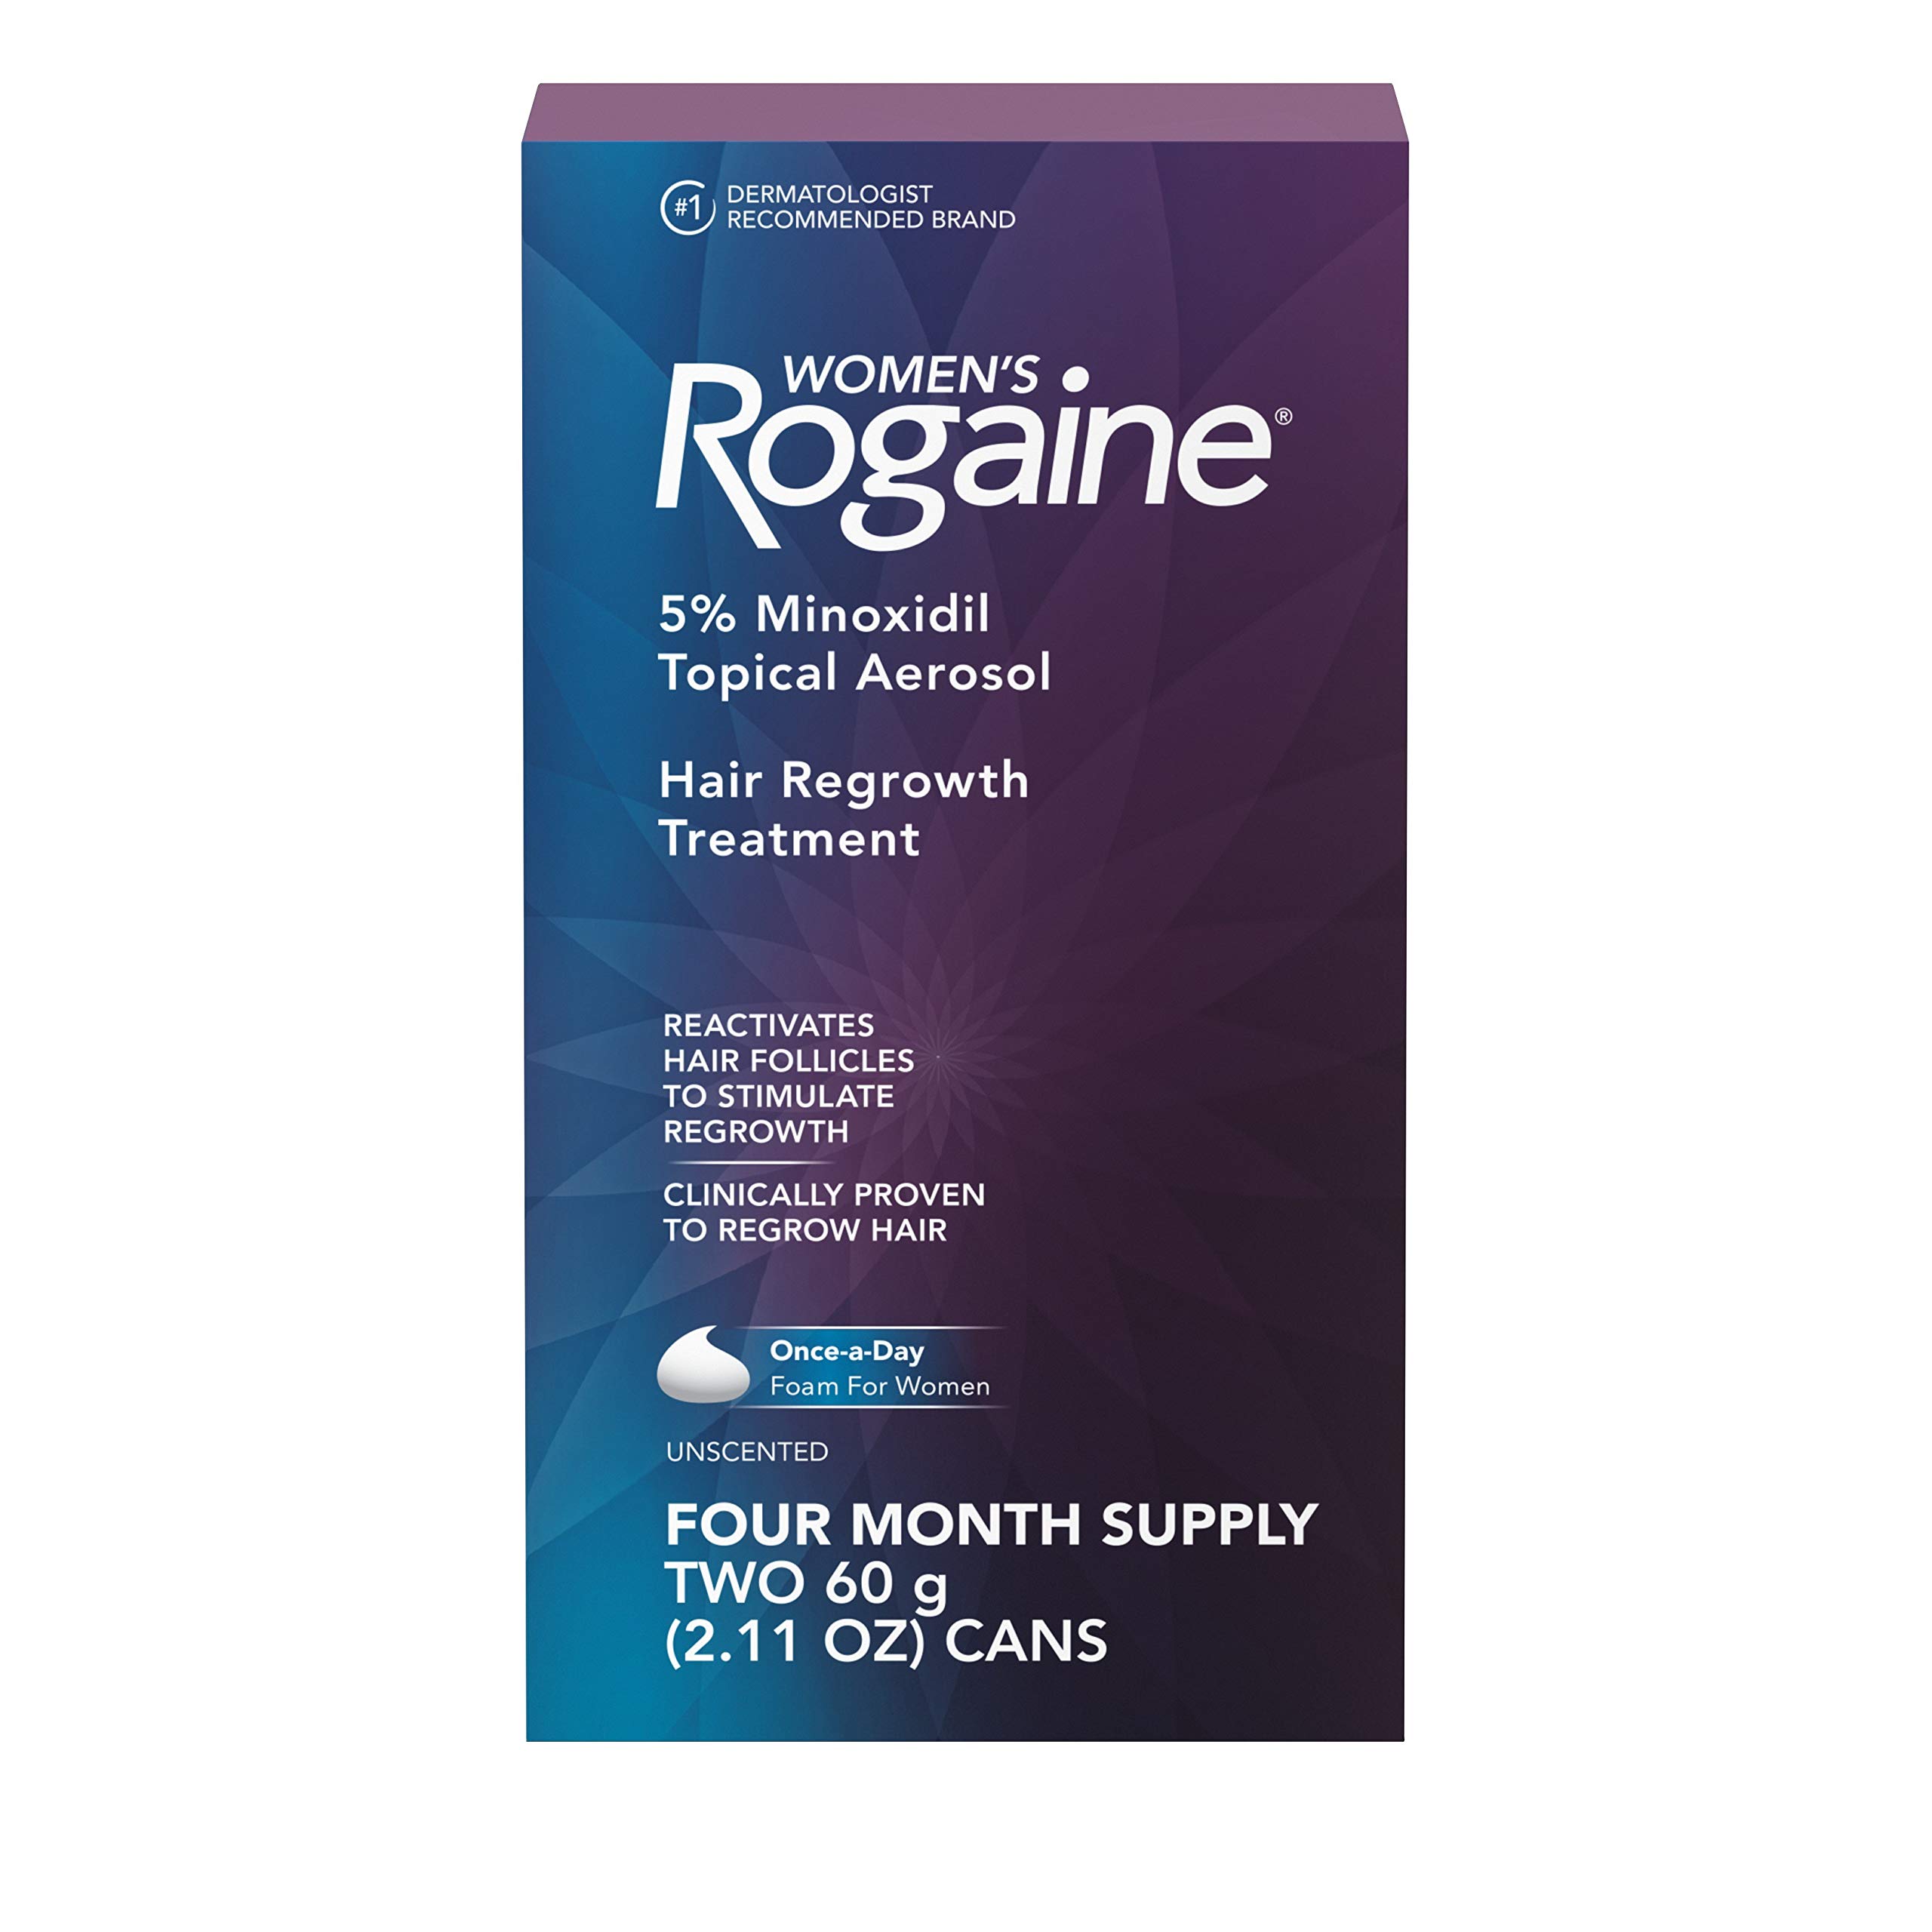 Women's Rogaine 5% Minoxidil Foam for Thinning Hair & Loss, Topical Once-A-Day Hair Fall Treatment for Women's Hair Regrowth, Unscented Minoxidil Foam, 4-Month Supply, 2 x 2.11 oz